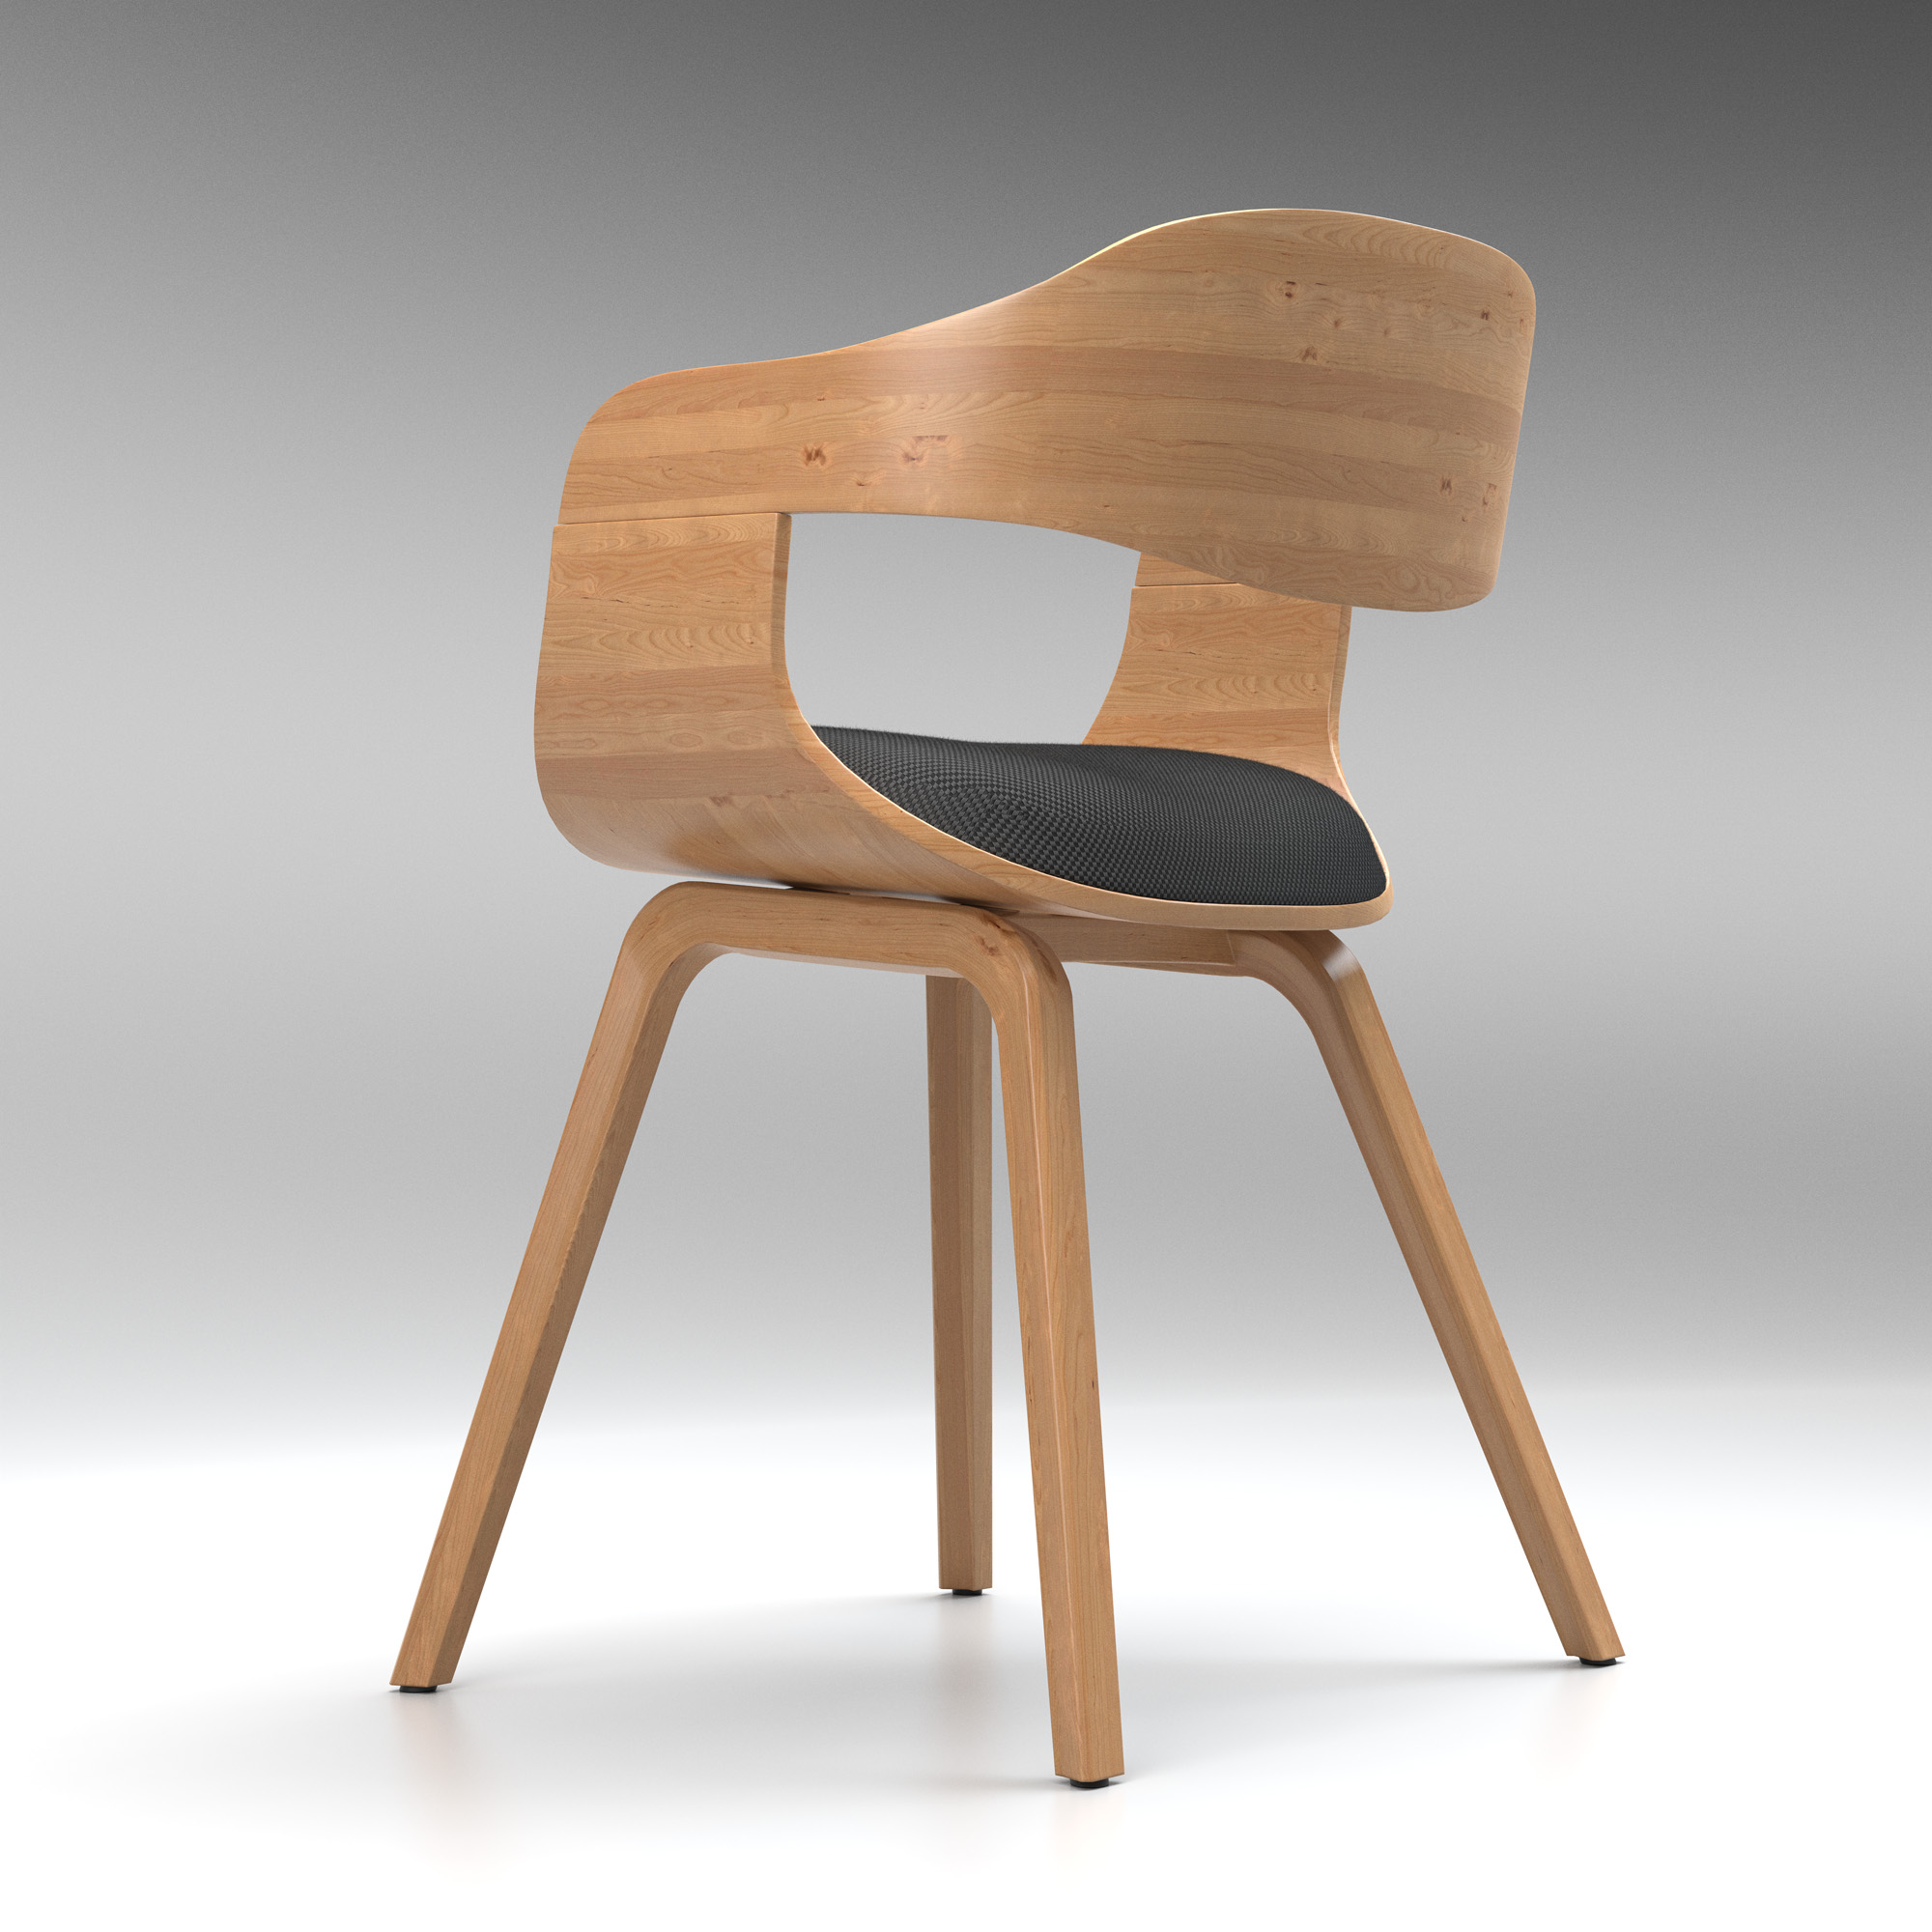 Costa Stoel Chair 3D Product Render Wipdesigns 2